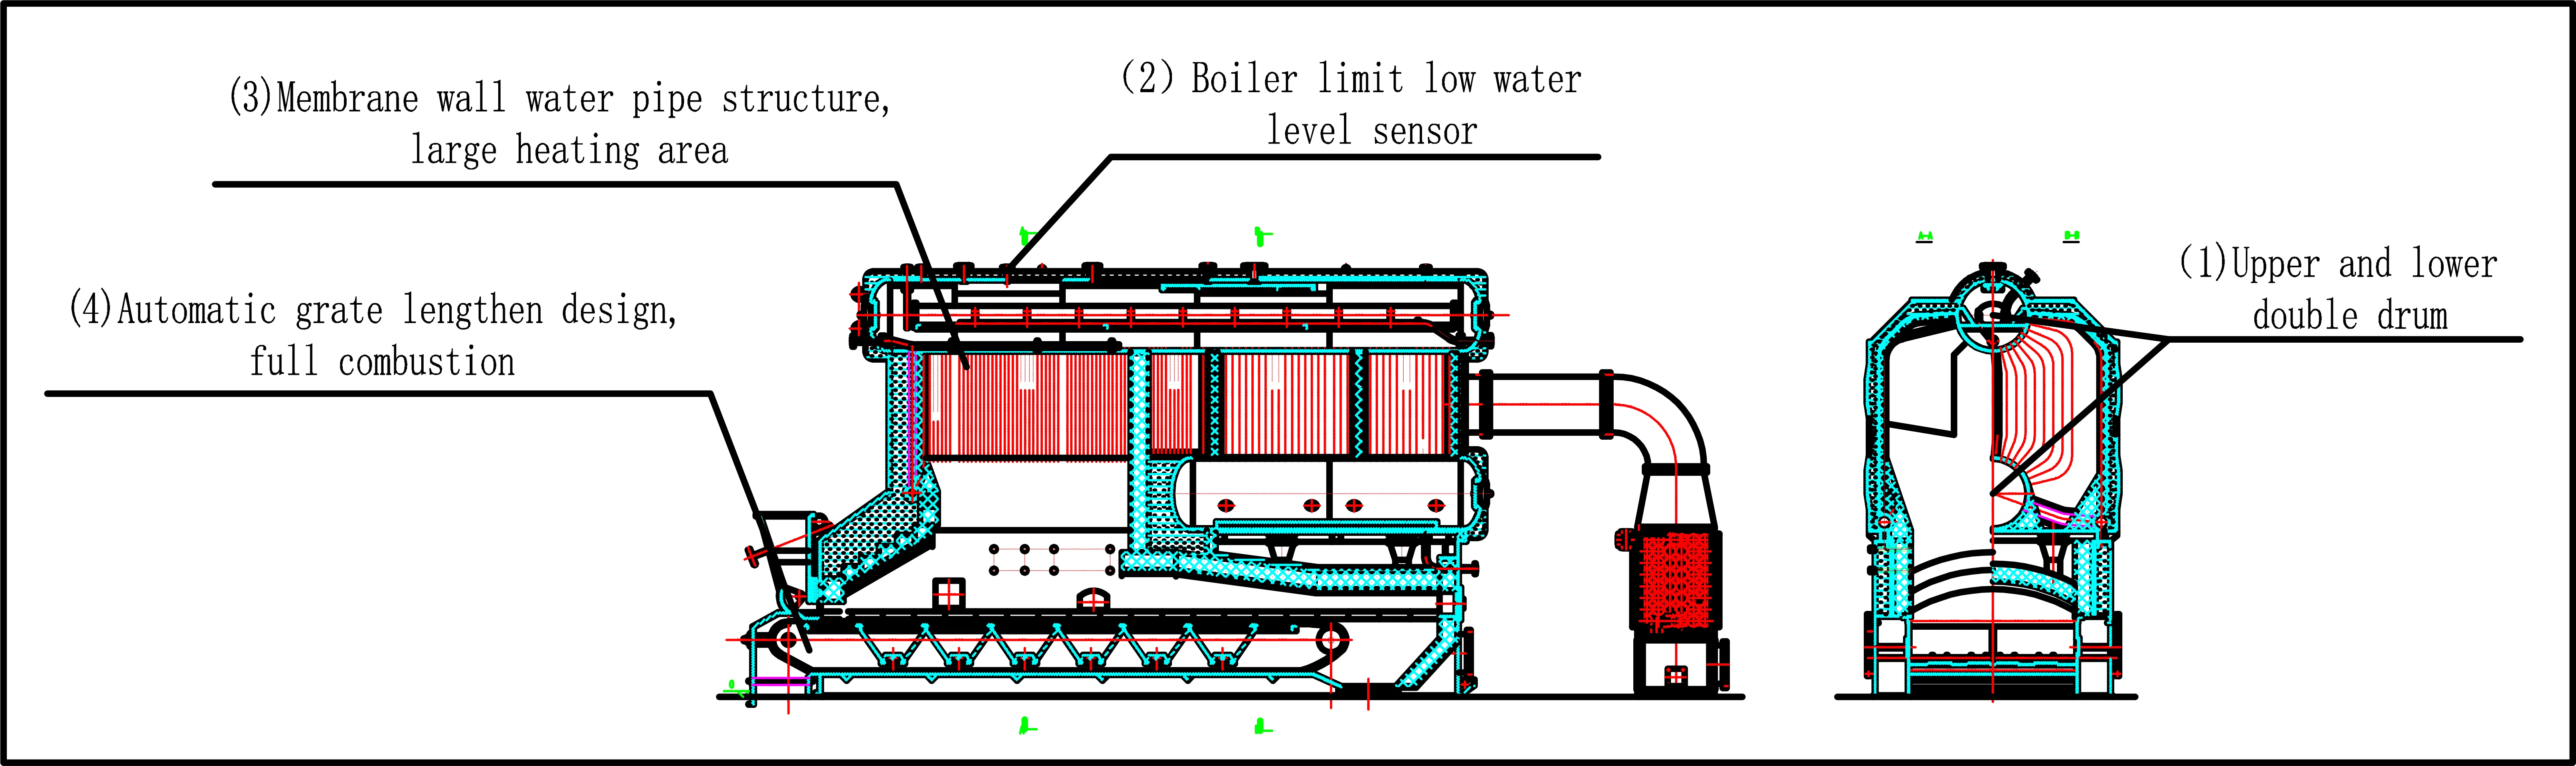 A part of the steam boiler that burns fuel is the фото 41